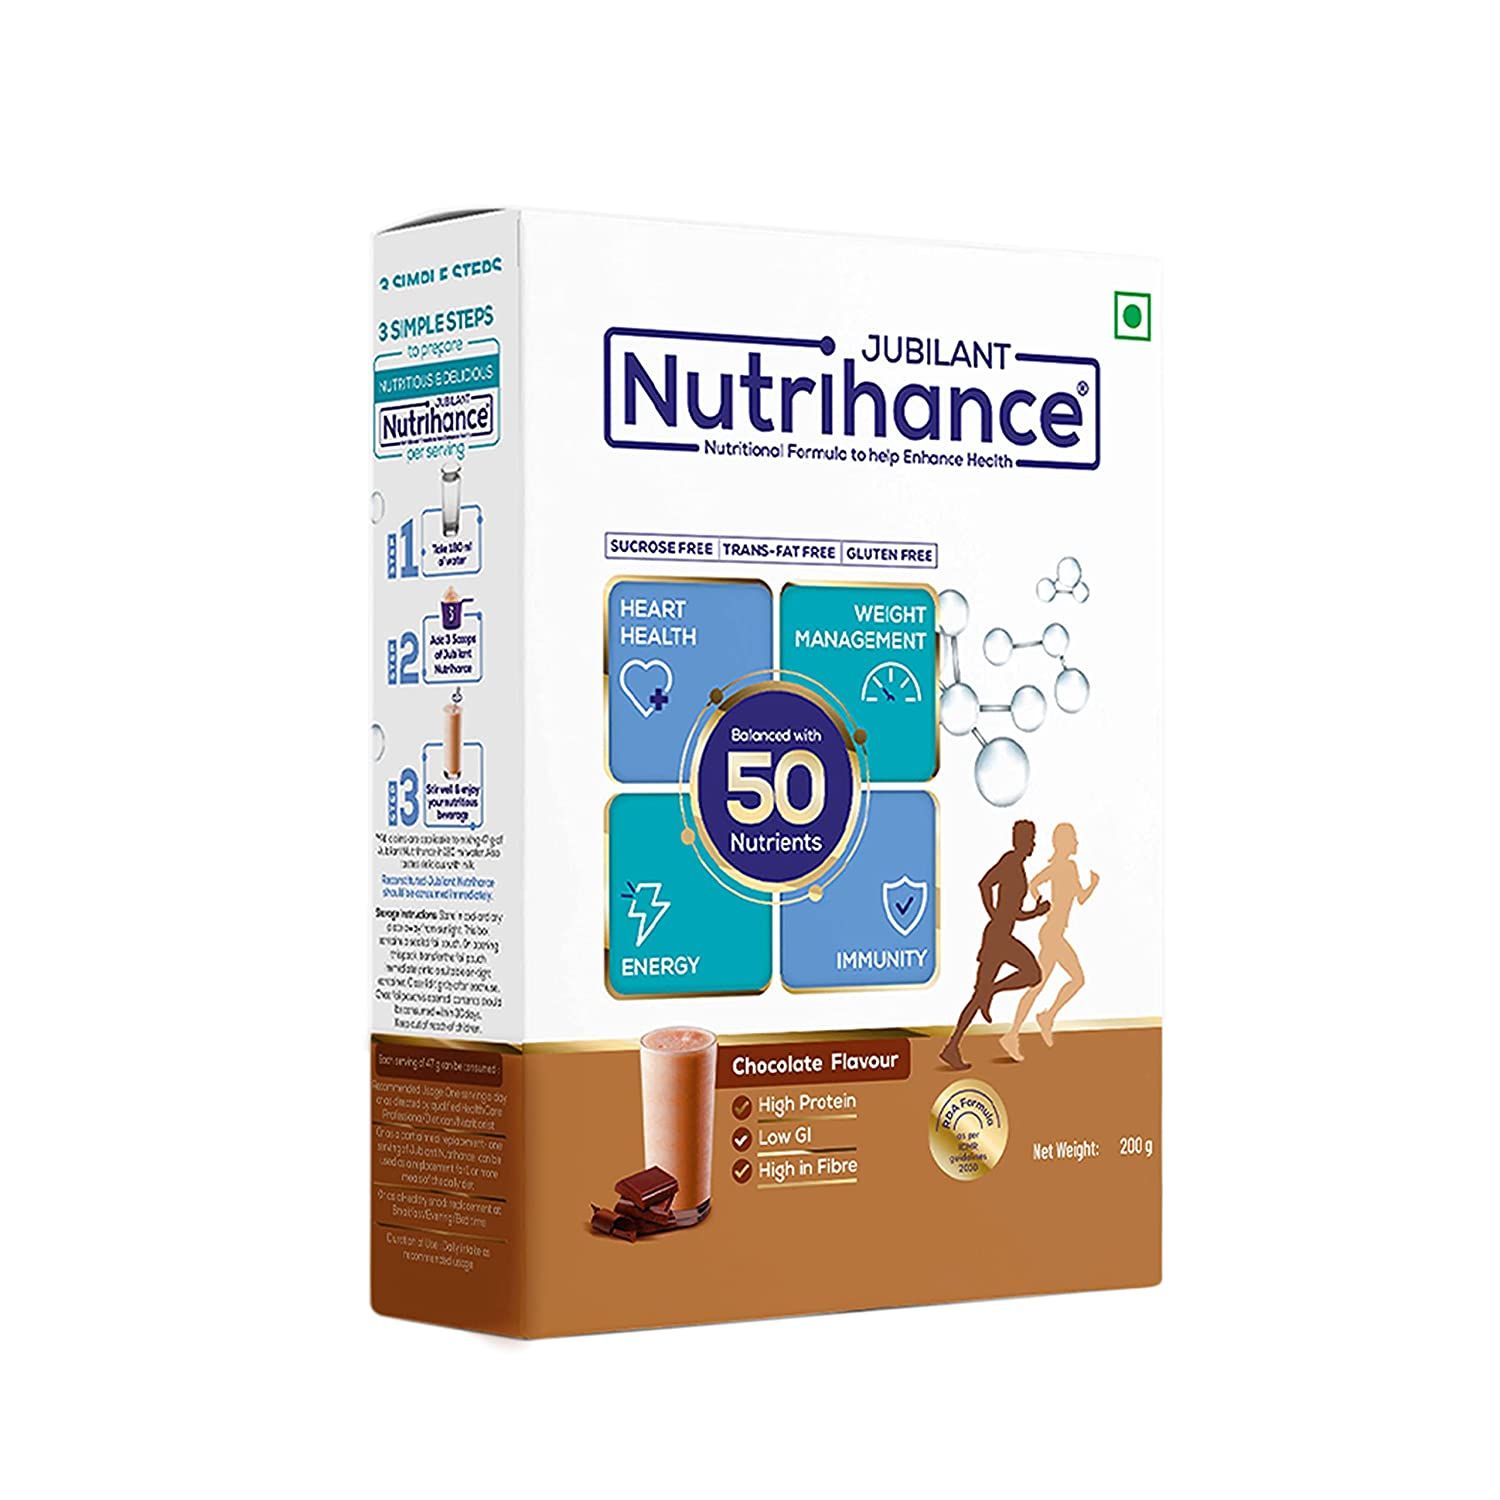 Jubilant Nutrihance Complete Nutritional Drink Chocolate Flavour Image